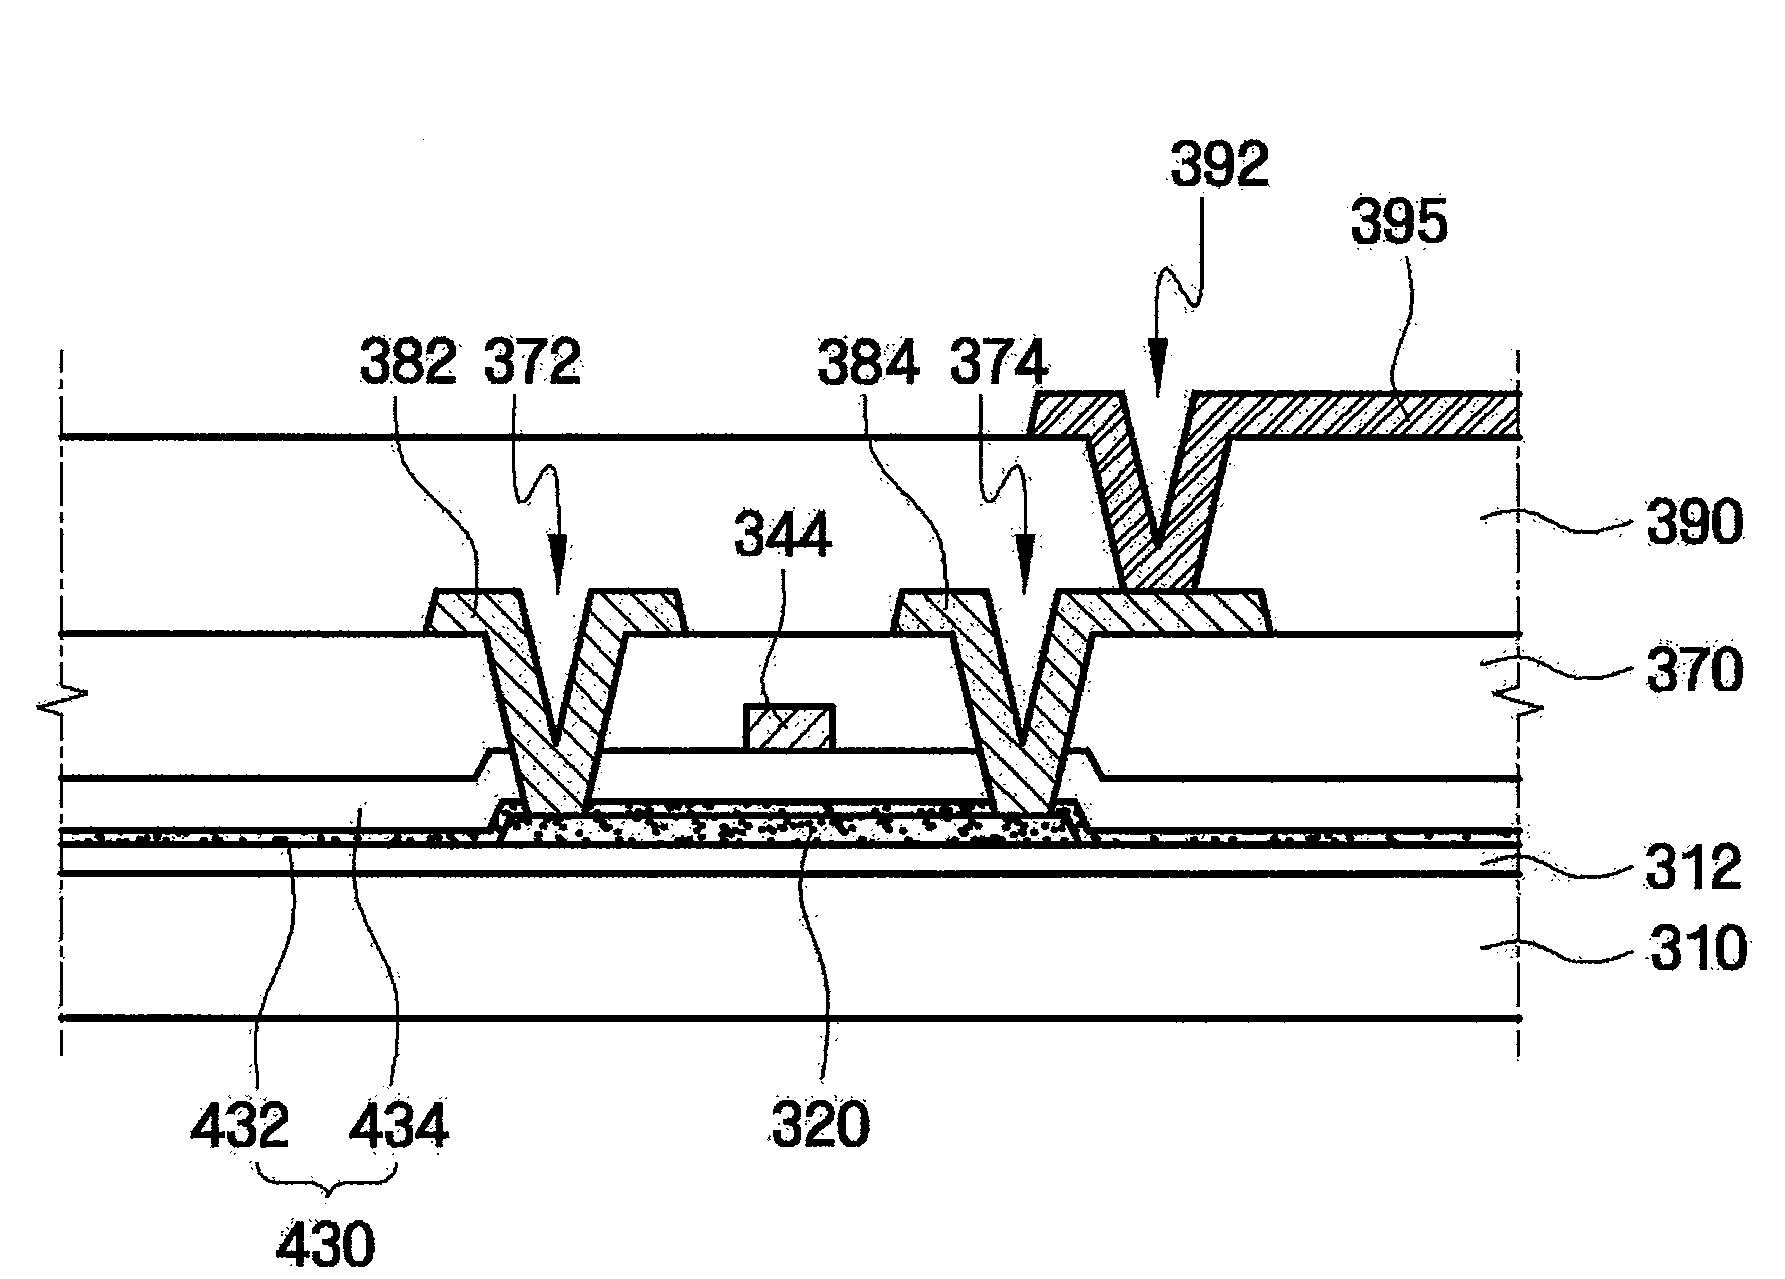 Thin film transistor array substrate having improved electrical characteristics and method of manufacturing the same